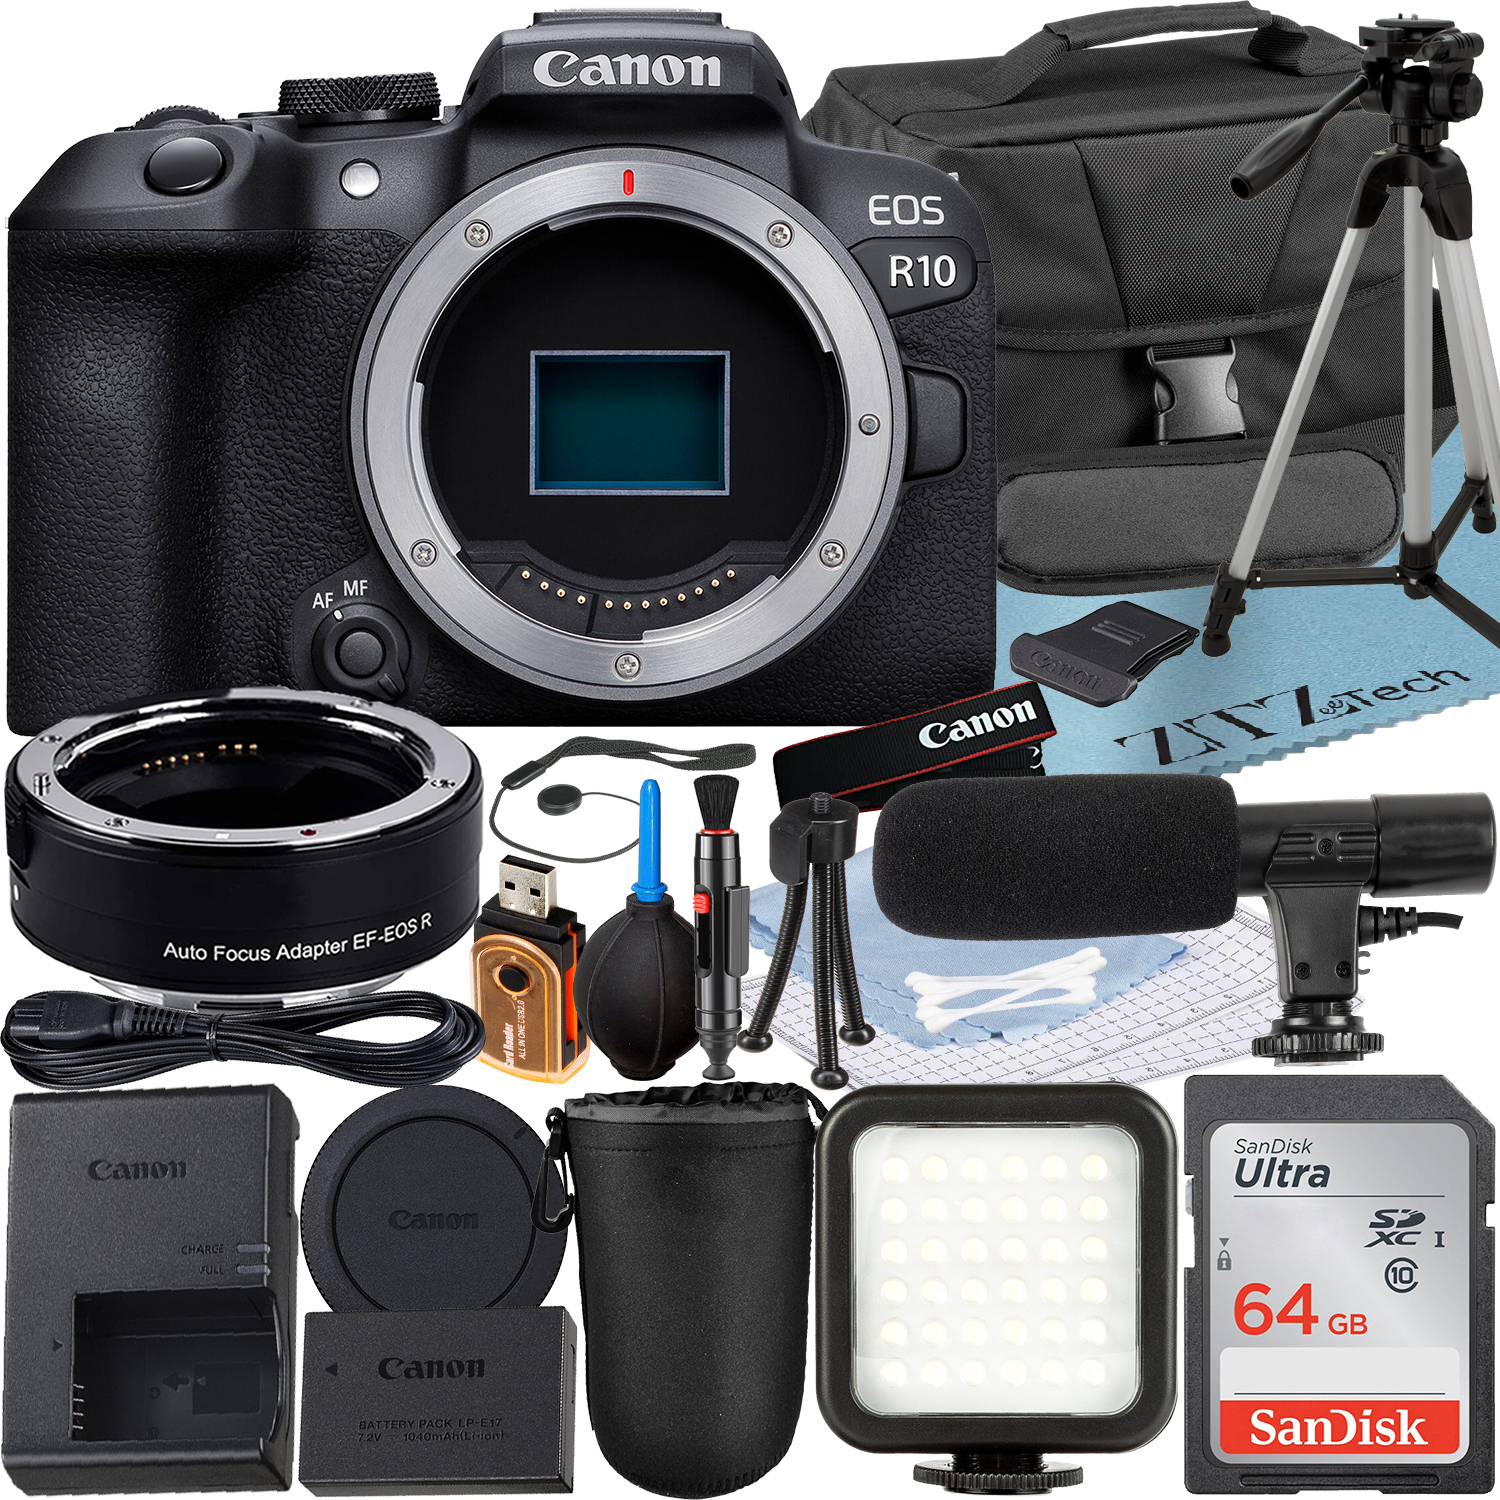 Canon EOS R10 Mirrorless Camera (Body) with Mount Adapter + SanDisk 64GB Memory Card + Case + LED Flash + ZeeTech Accessory Bundle